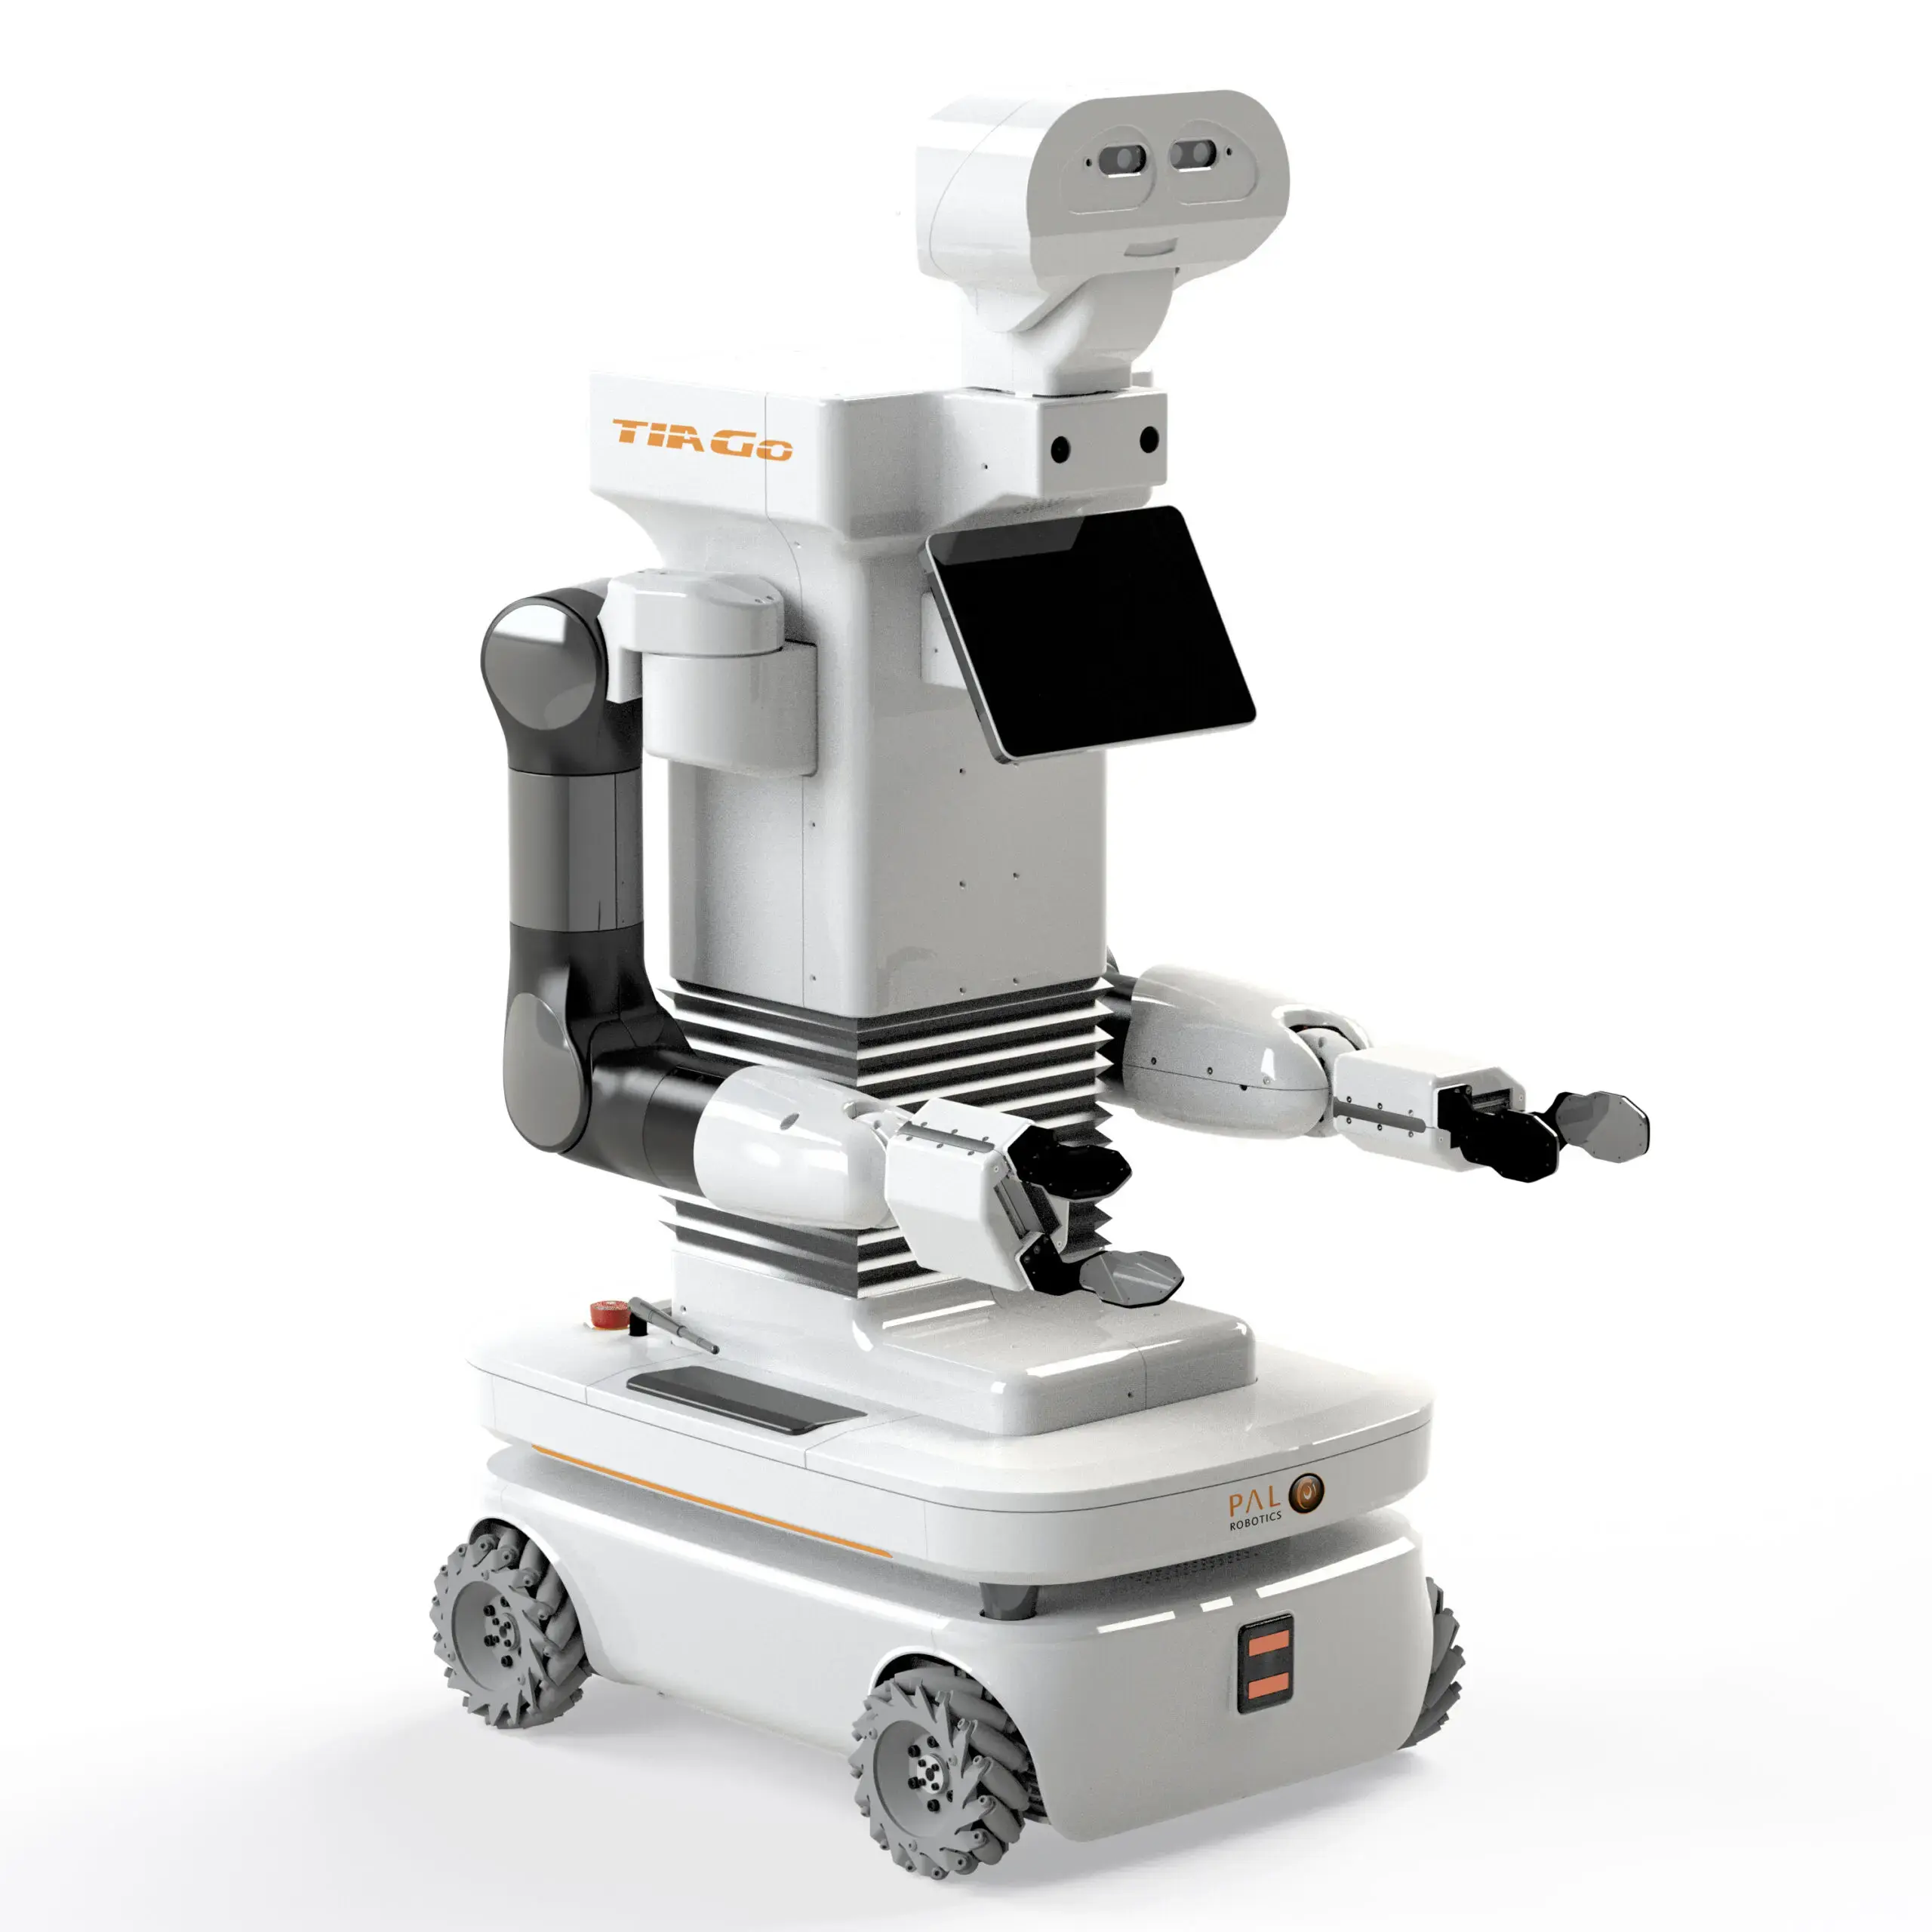 The mobile manipulator robot TIAGo Omni++ with Whole Body Control